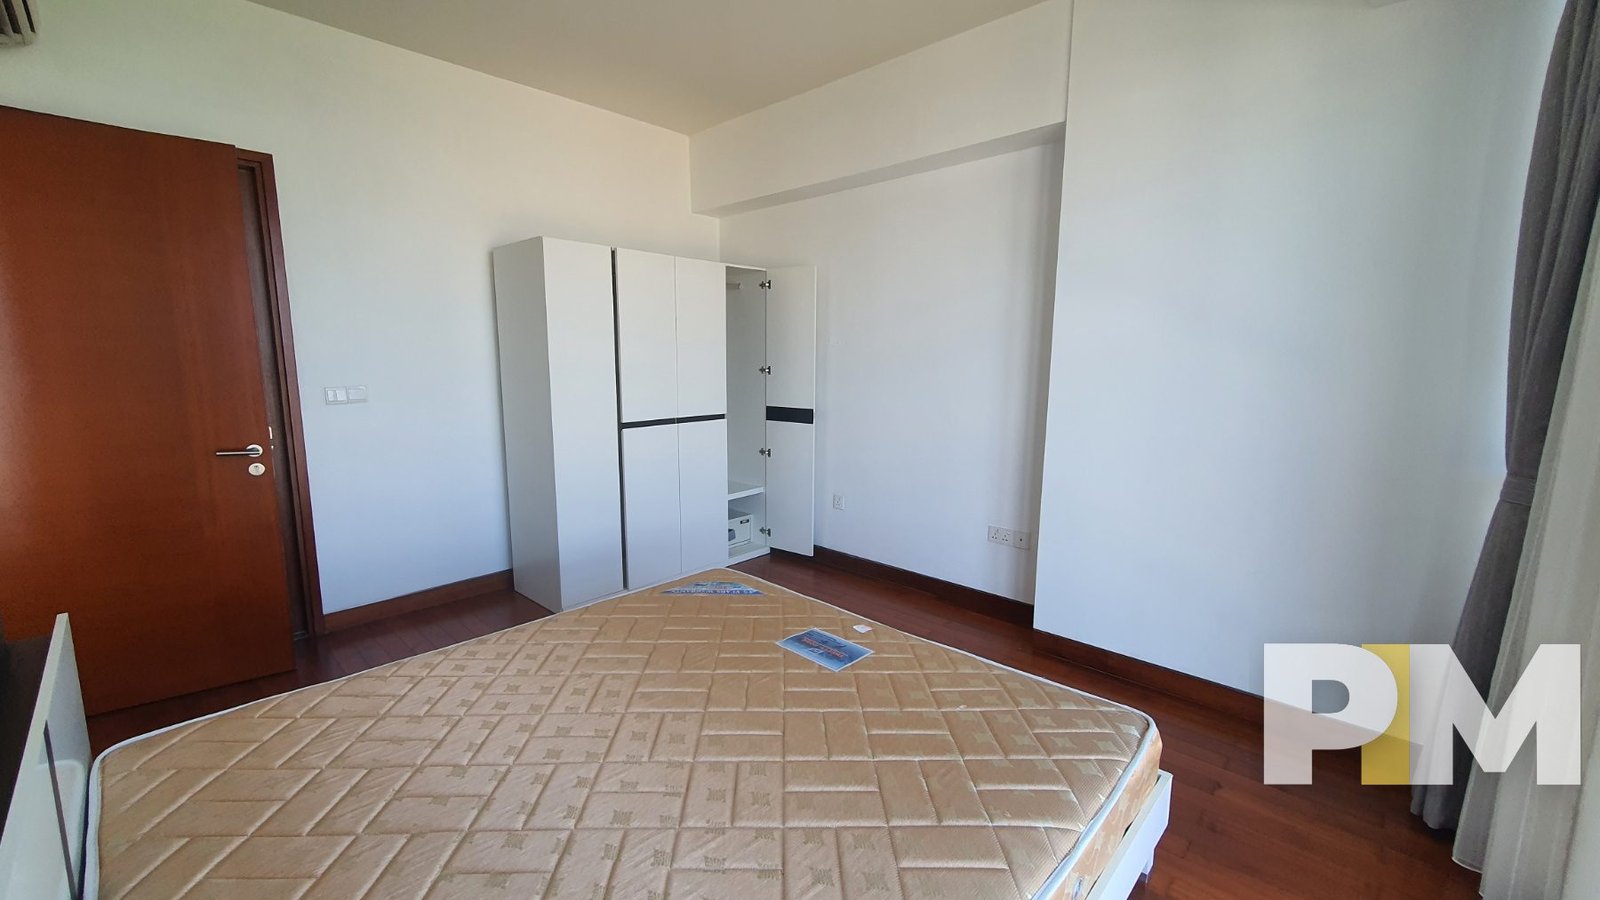 bedroom with wardrobe - Condo for rent in Kamayut